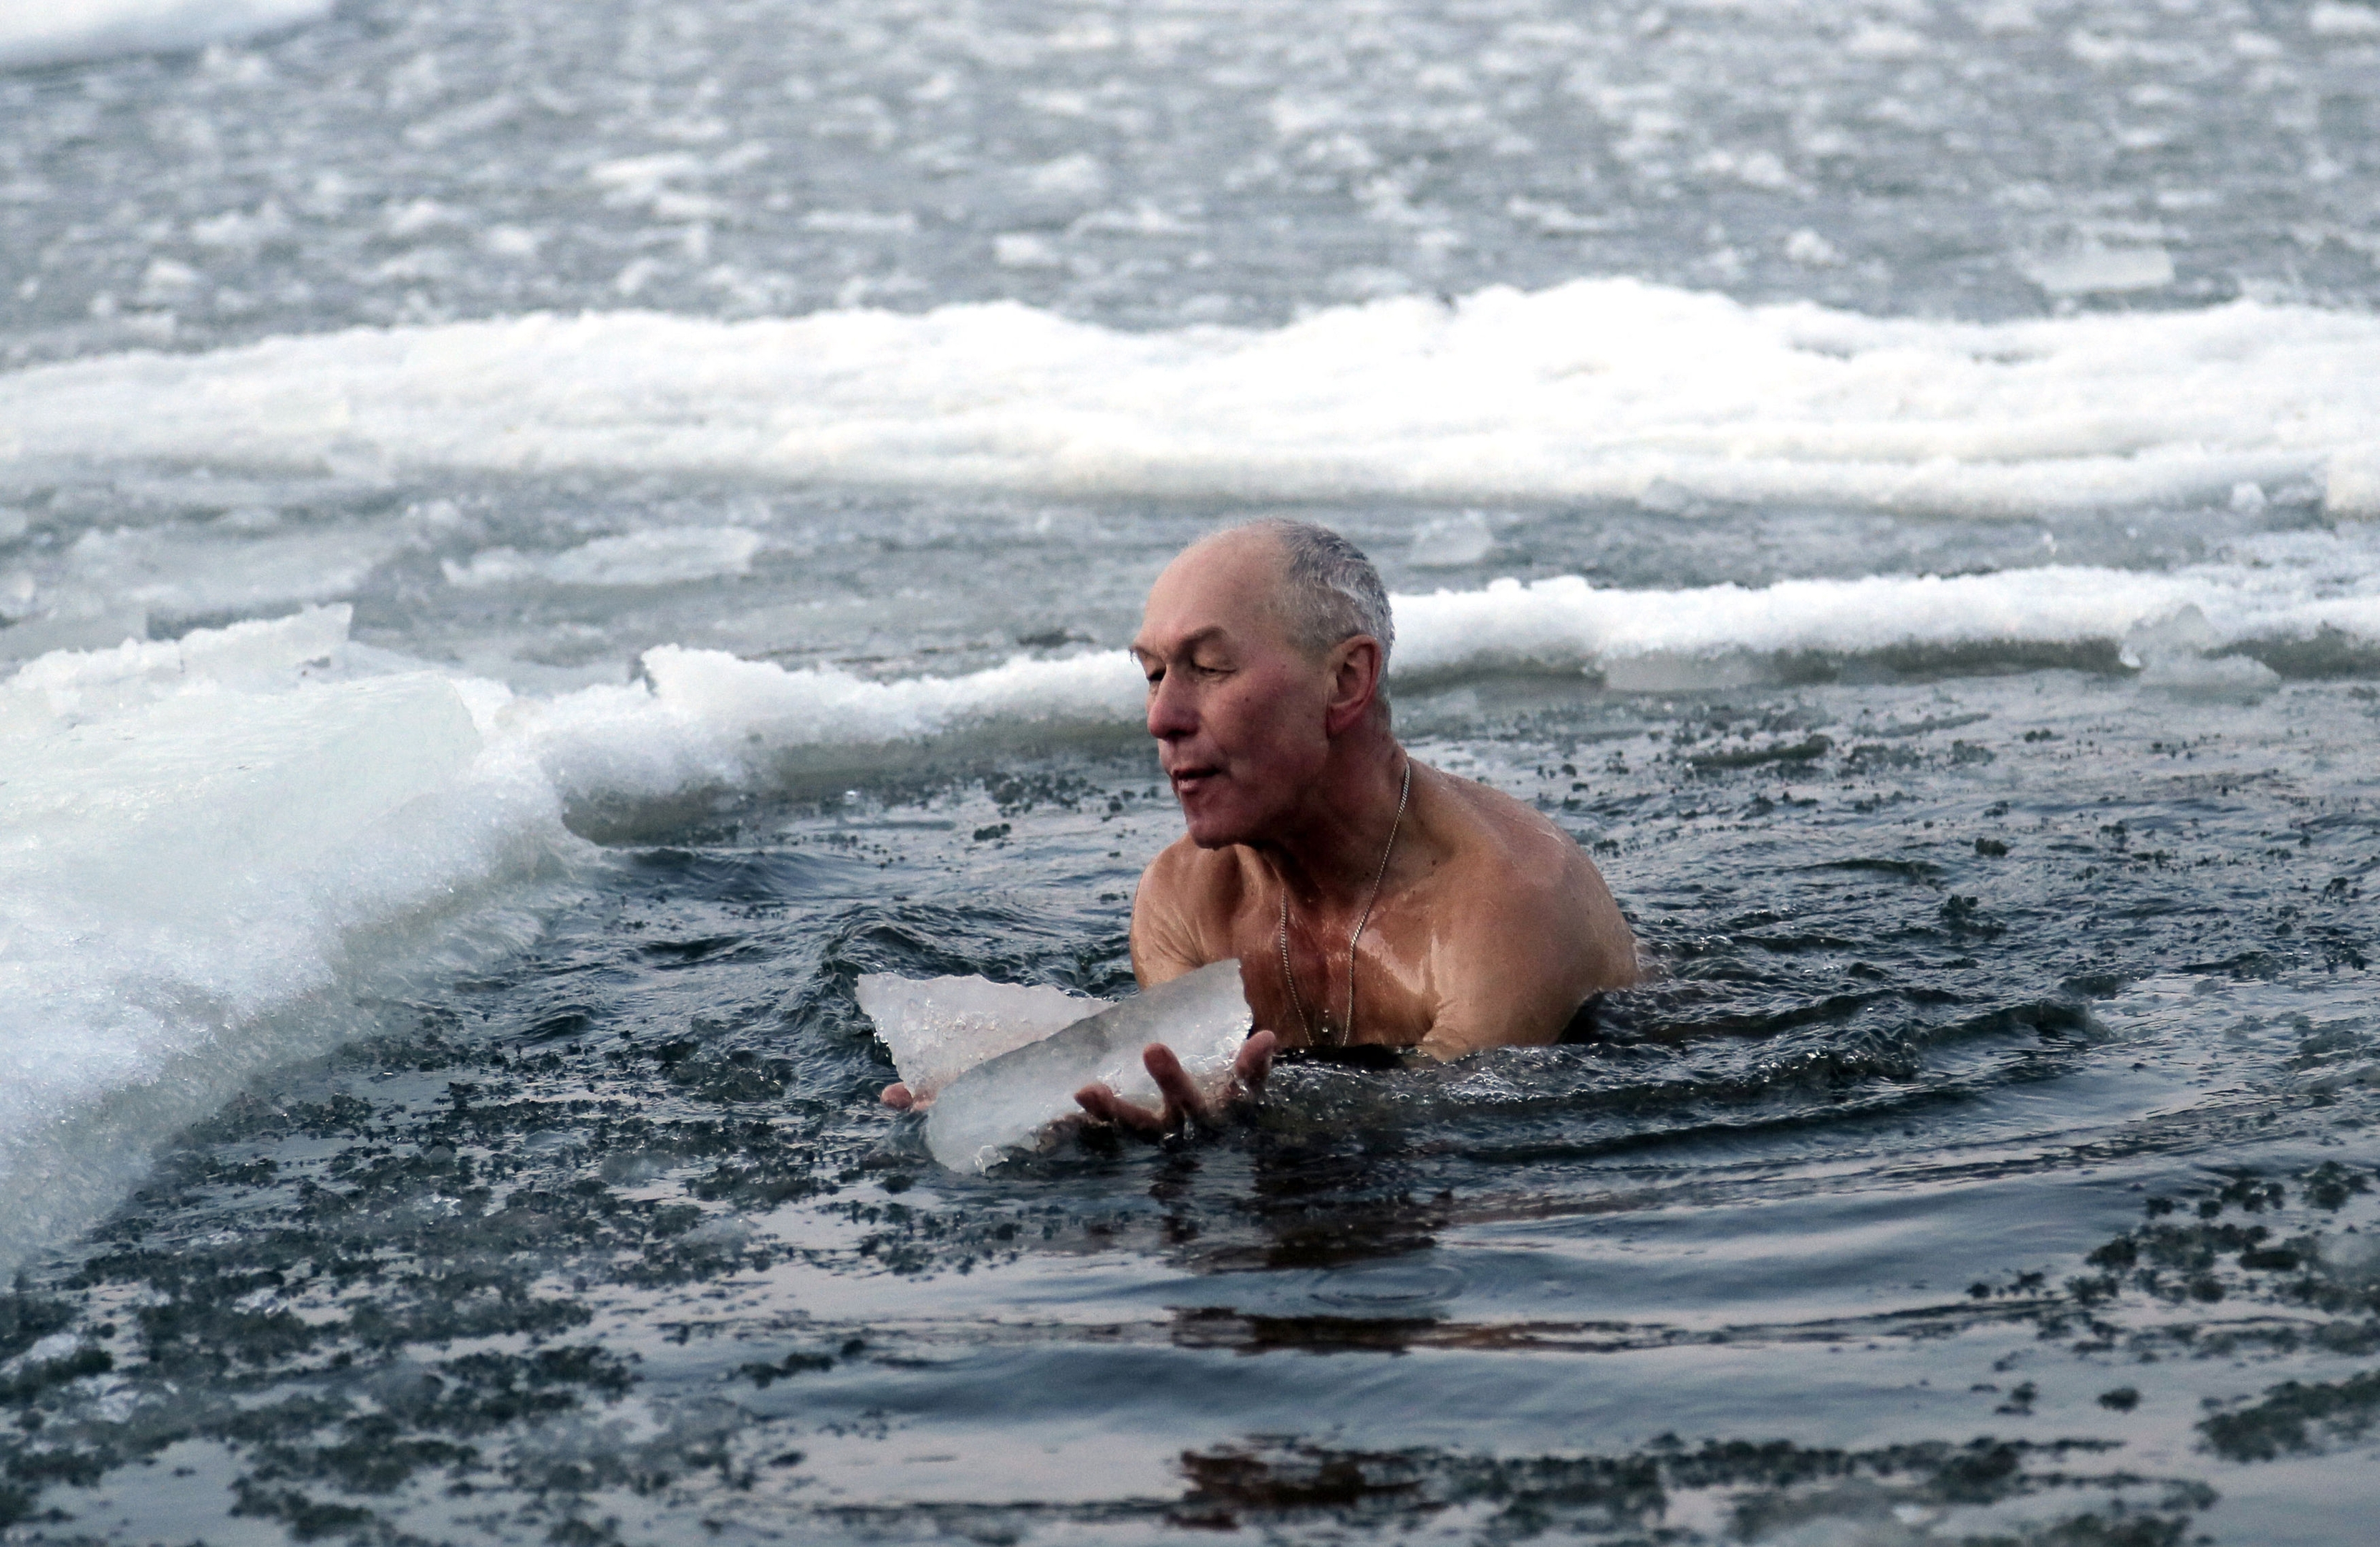 Russian Orthodox believers take icy plunge to celebrate 